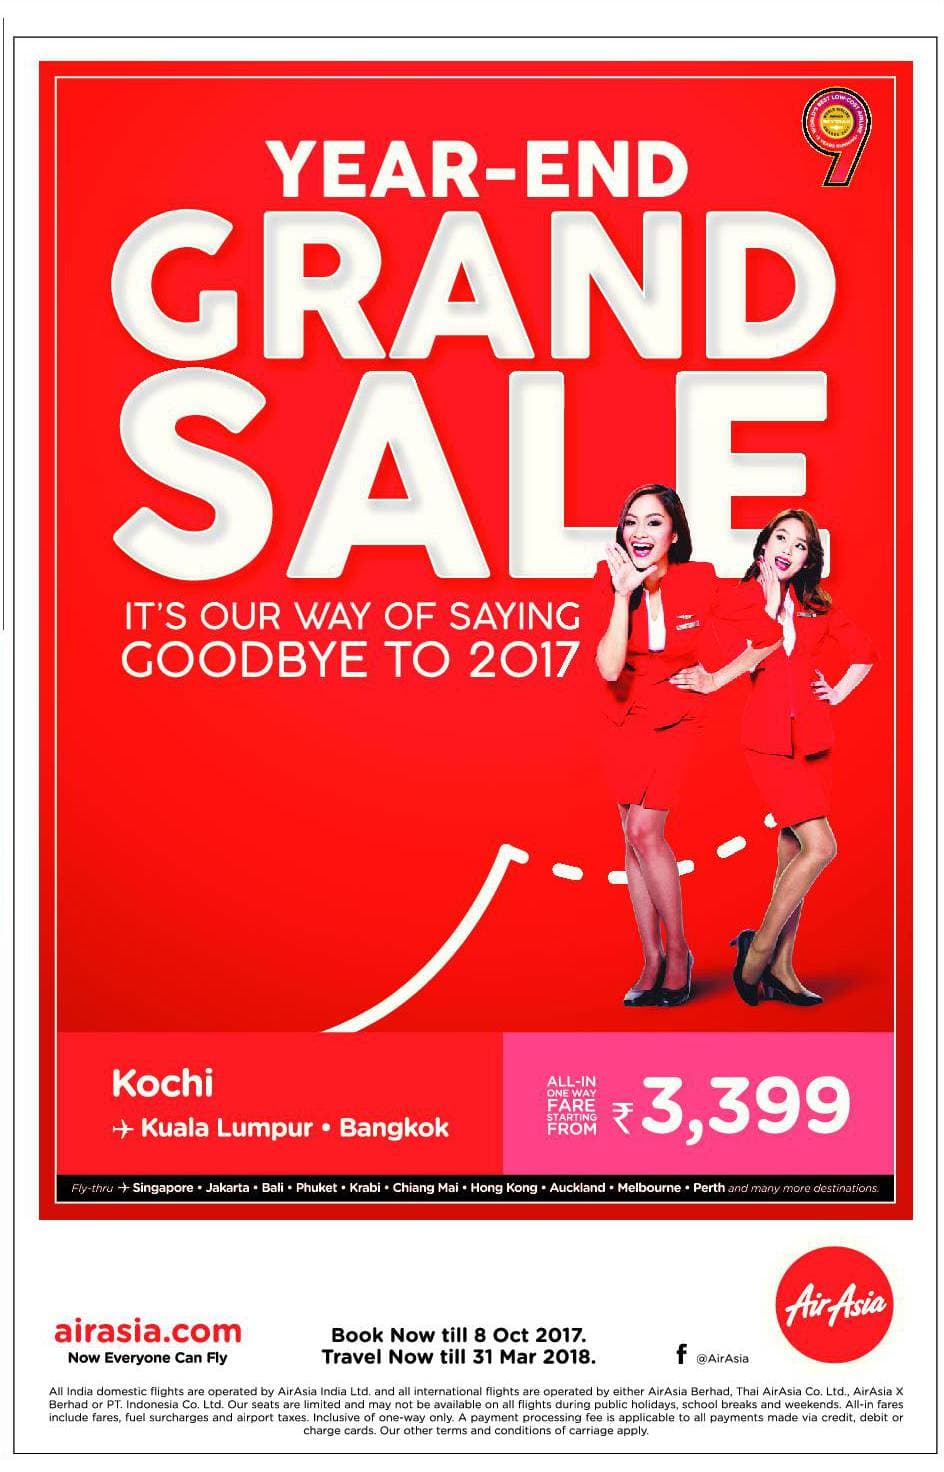 Air Asia Year End Grand Sale Its Our Way Of Saying Goodbye To 2017 